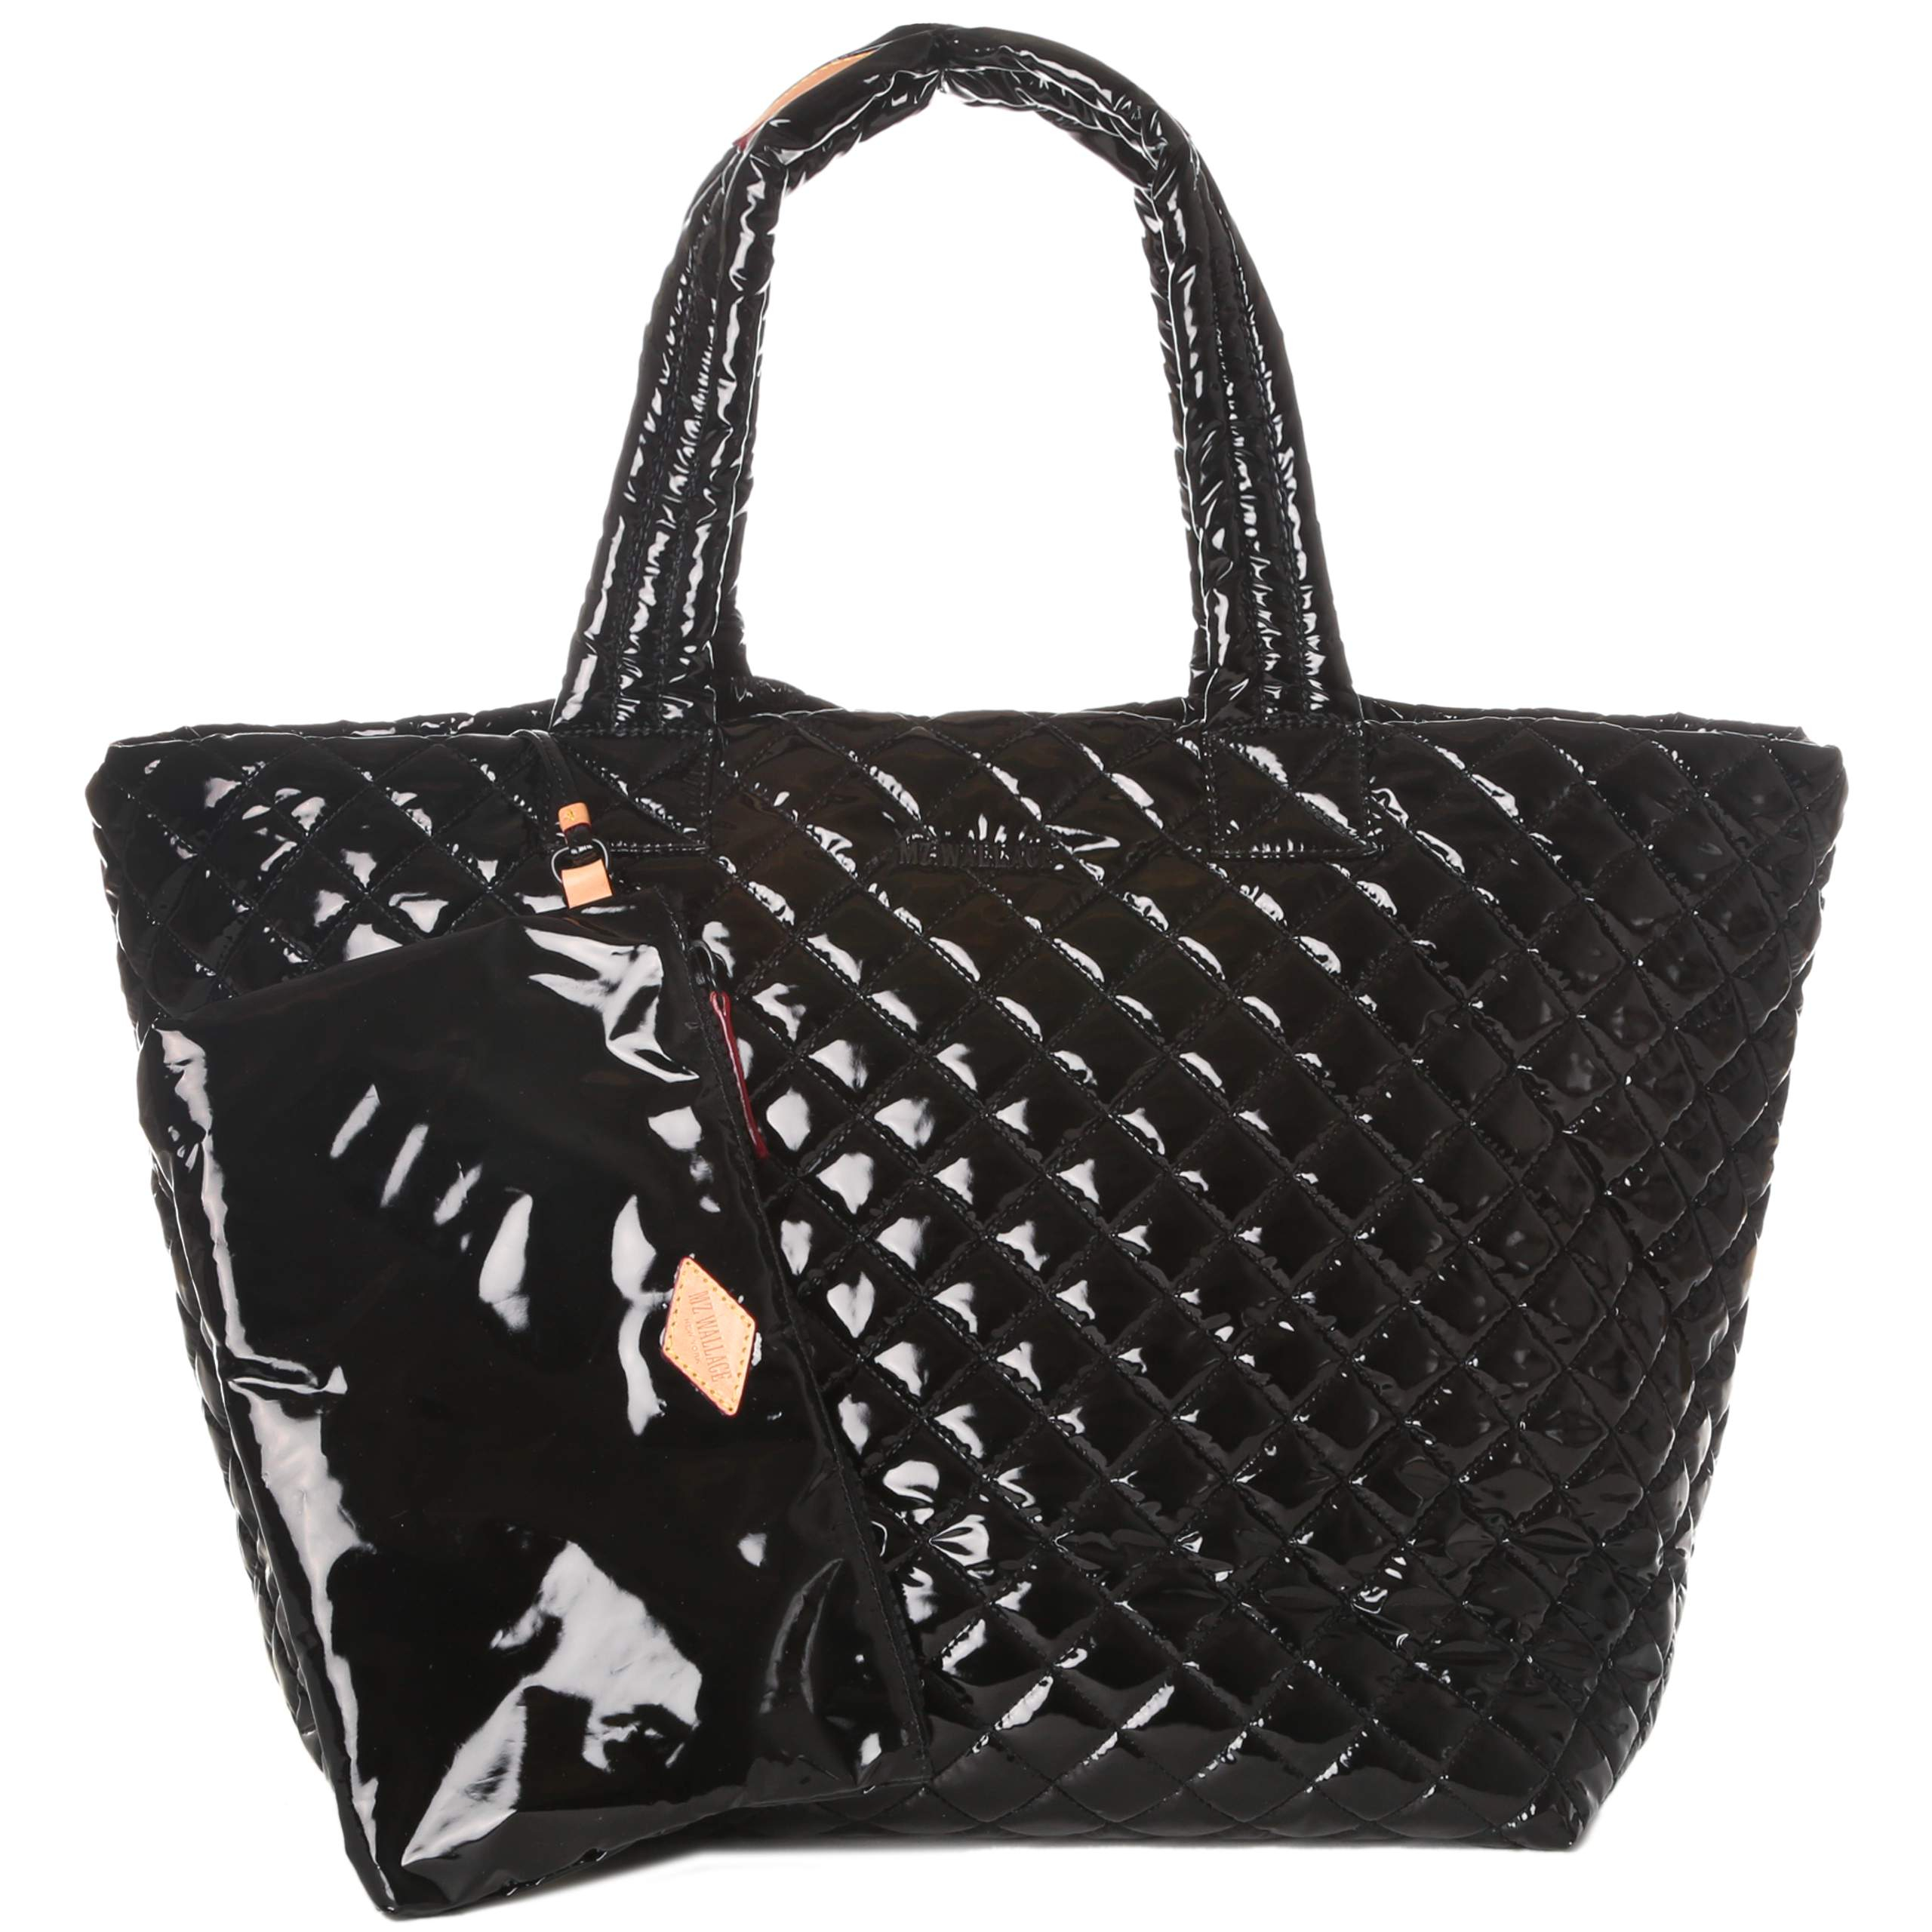 MZ Wallace Synthetic Large Metro Tote in Black - Lyst